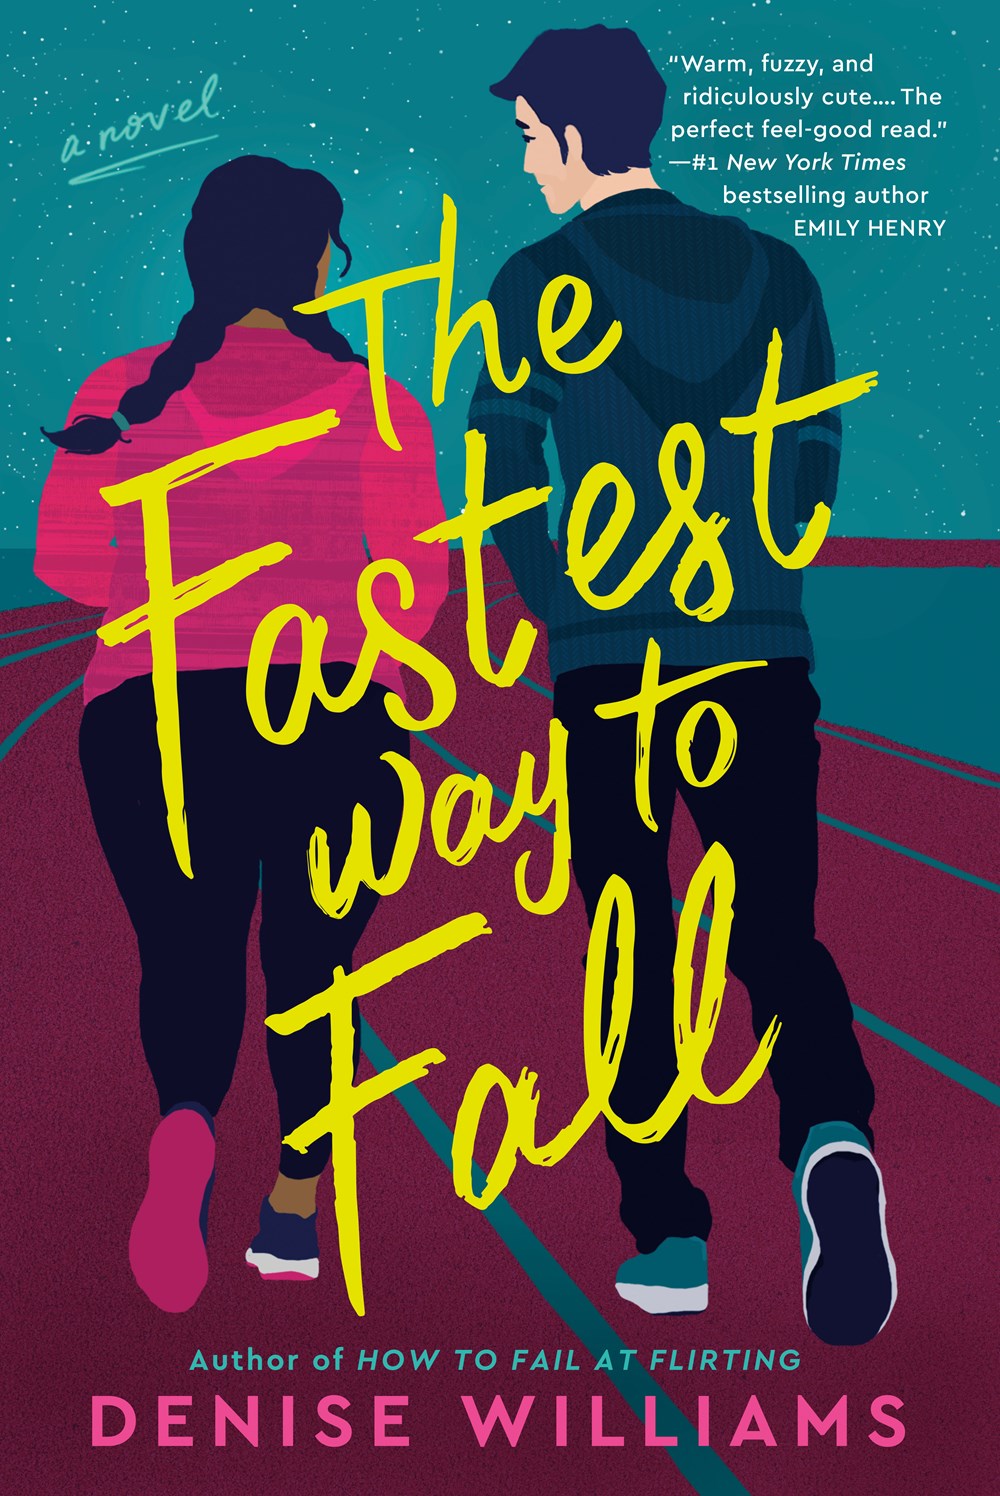 Image for "The Fastest Way to Fall"